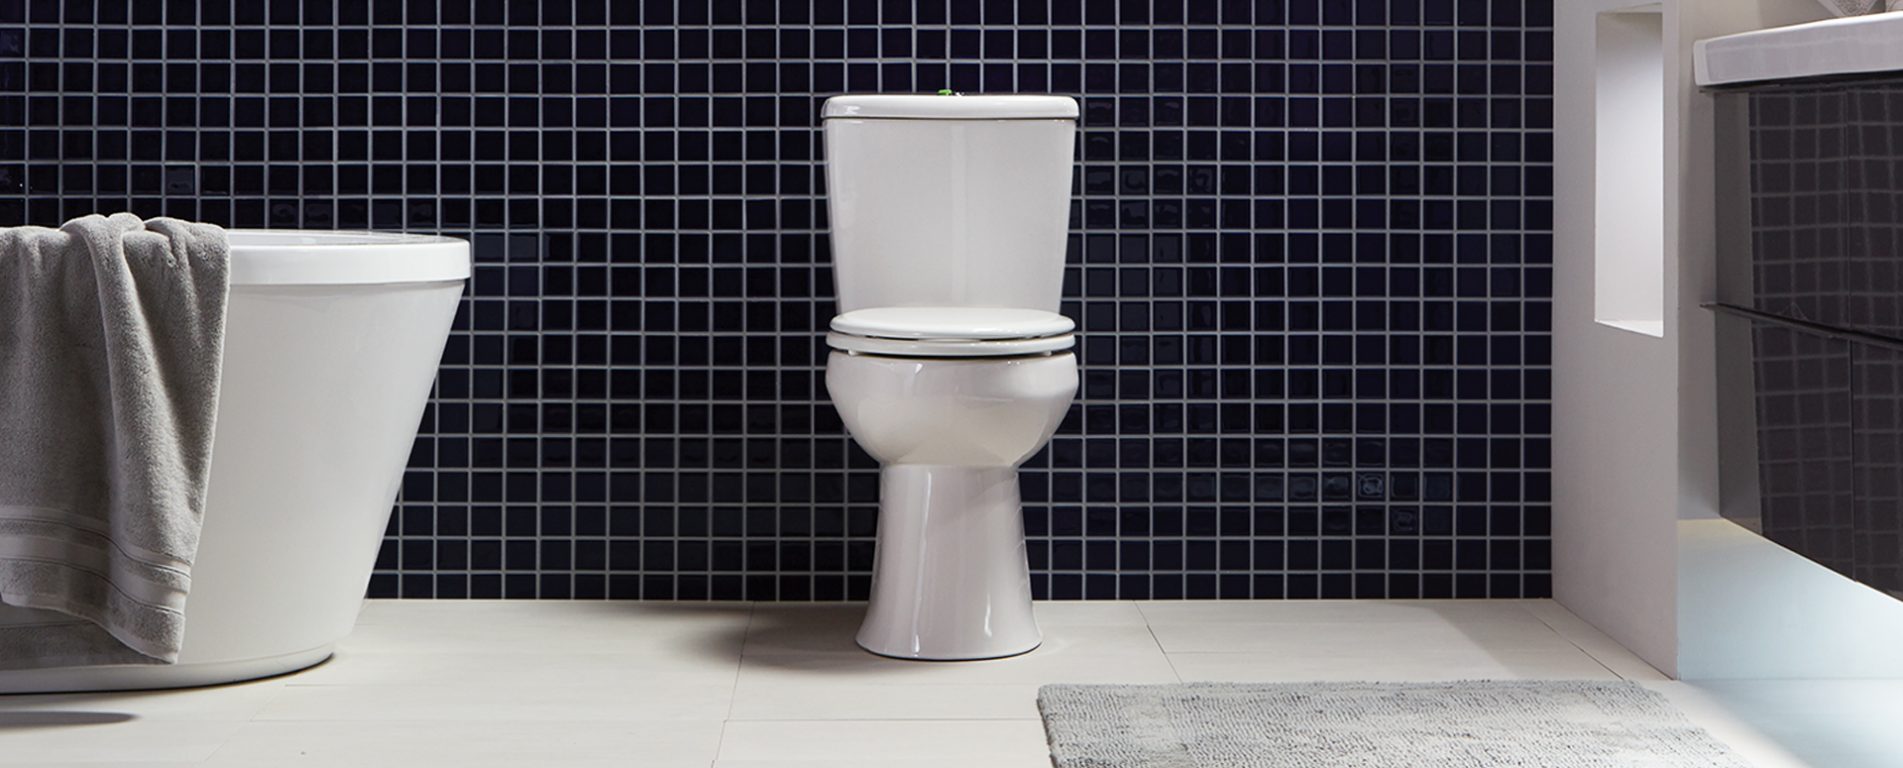 niagara-set-to-introduce-its-most-efficient-toilet-to-date